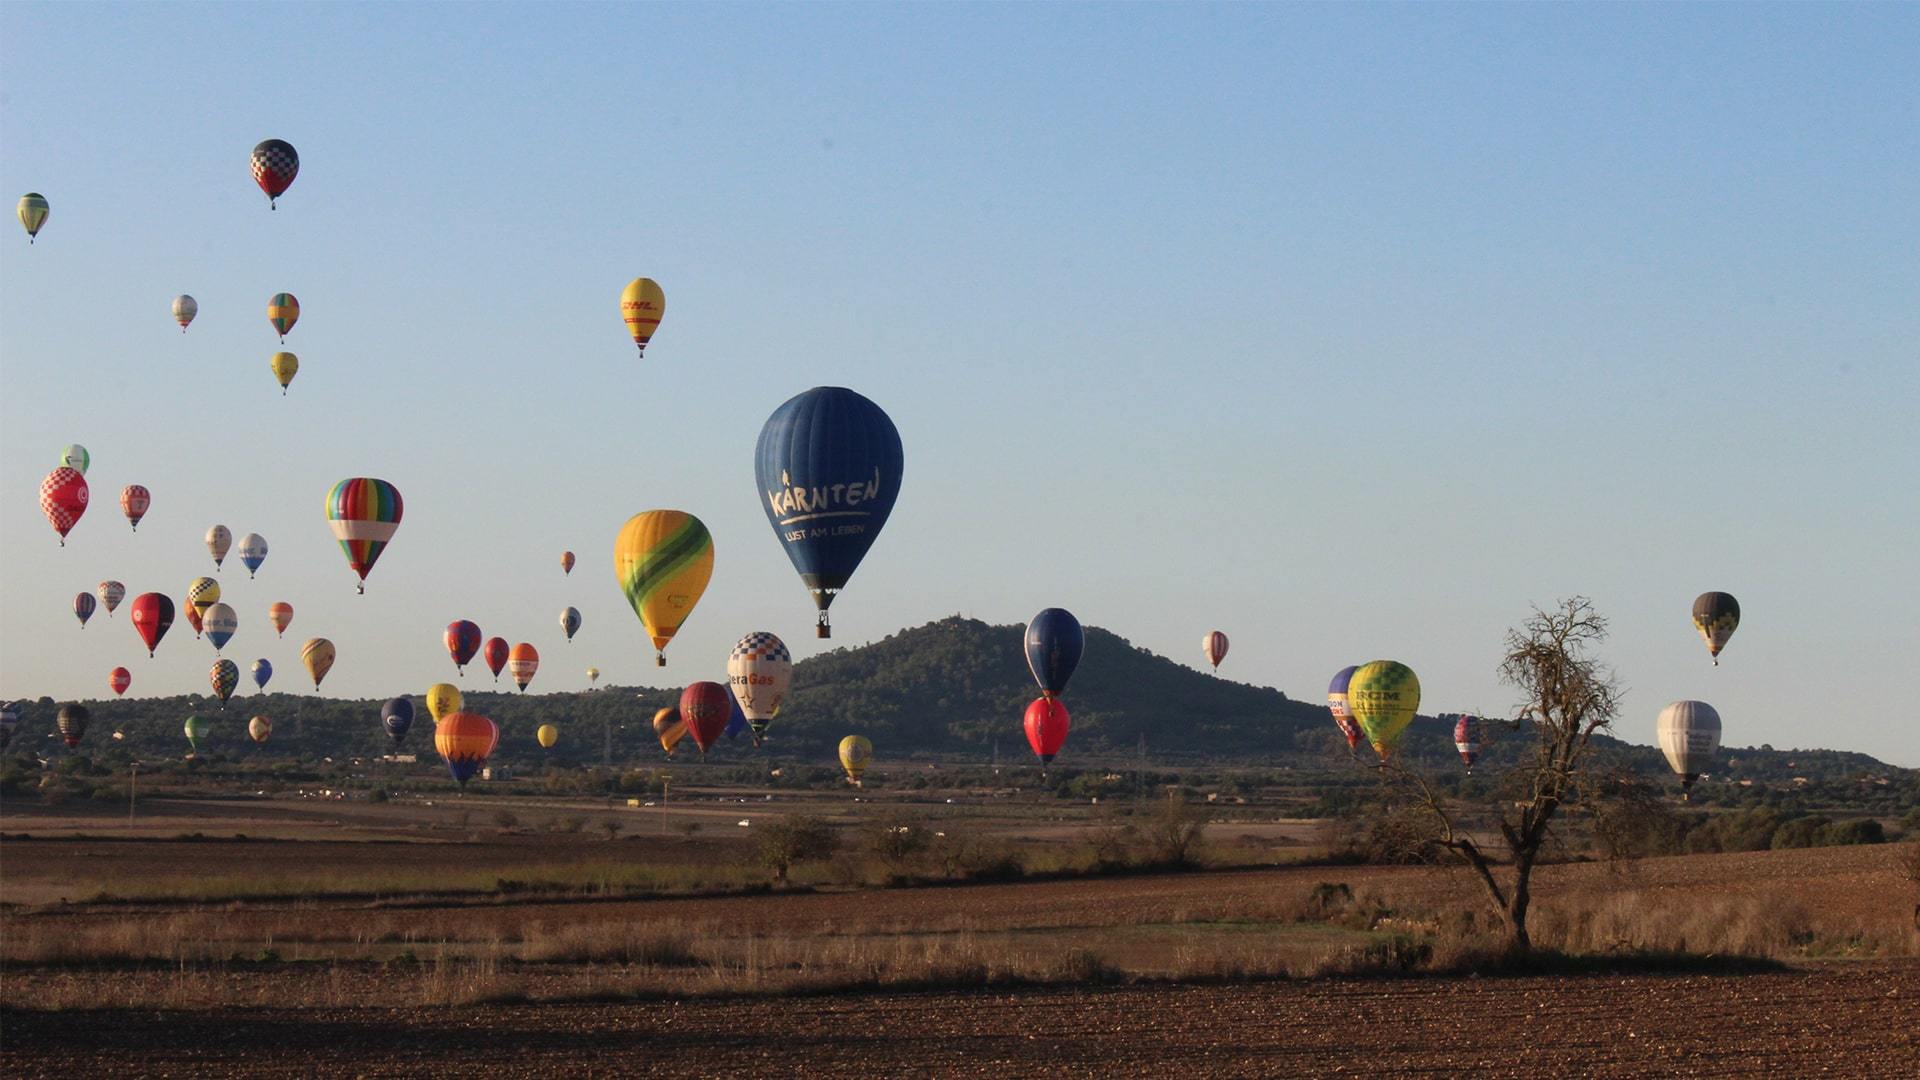 Hundred of hot air balloons flying countryside mallorca spectacular photo Adele Chretien min